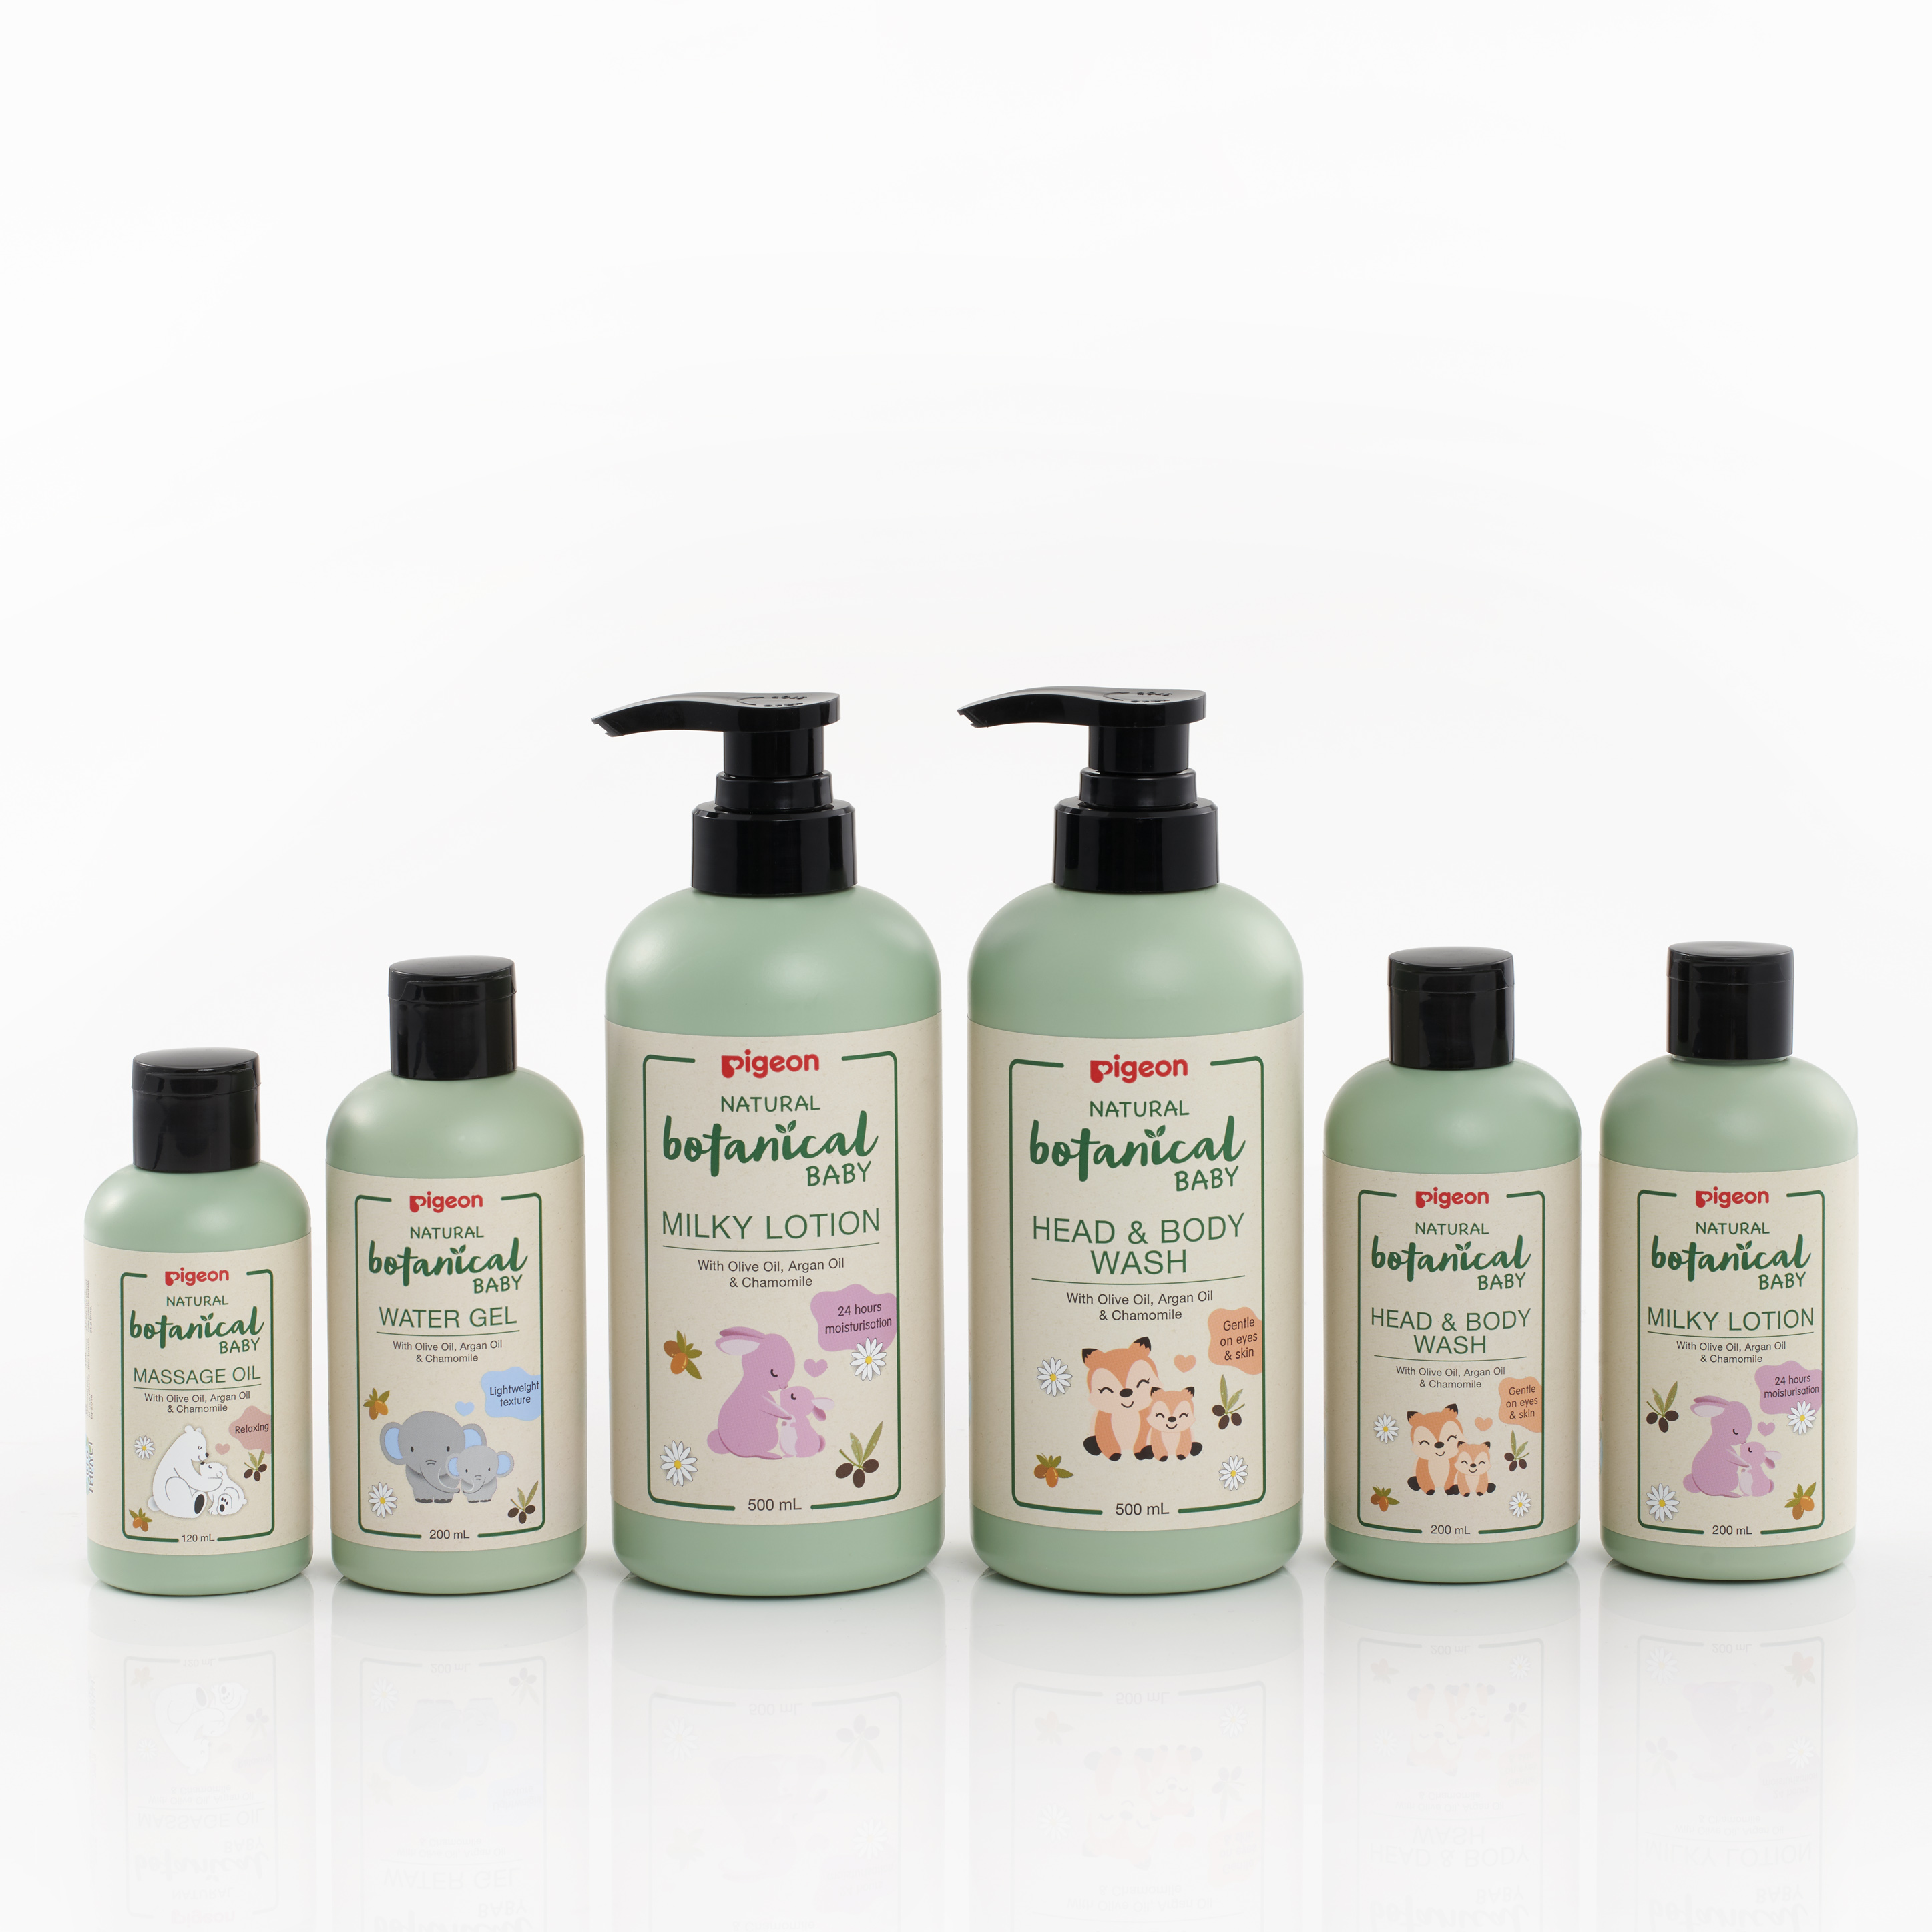 Pigeon Natural Botanical Baby Milky Lotion 500ml (PG-78412)